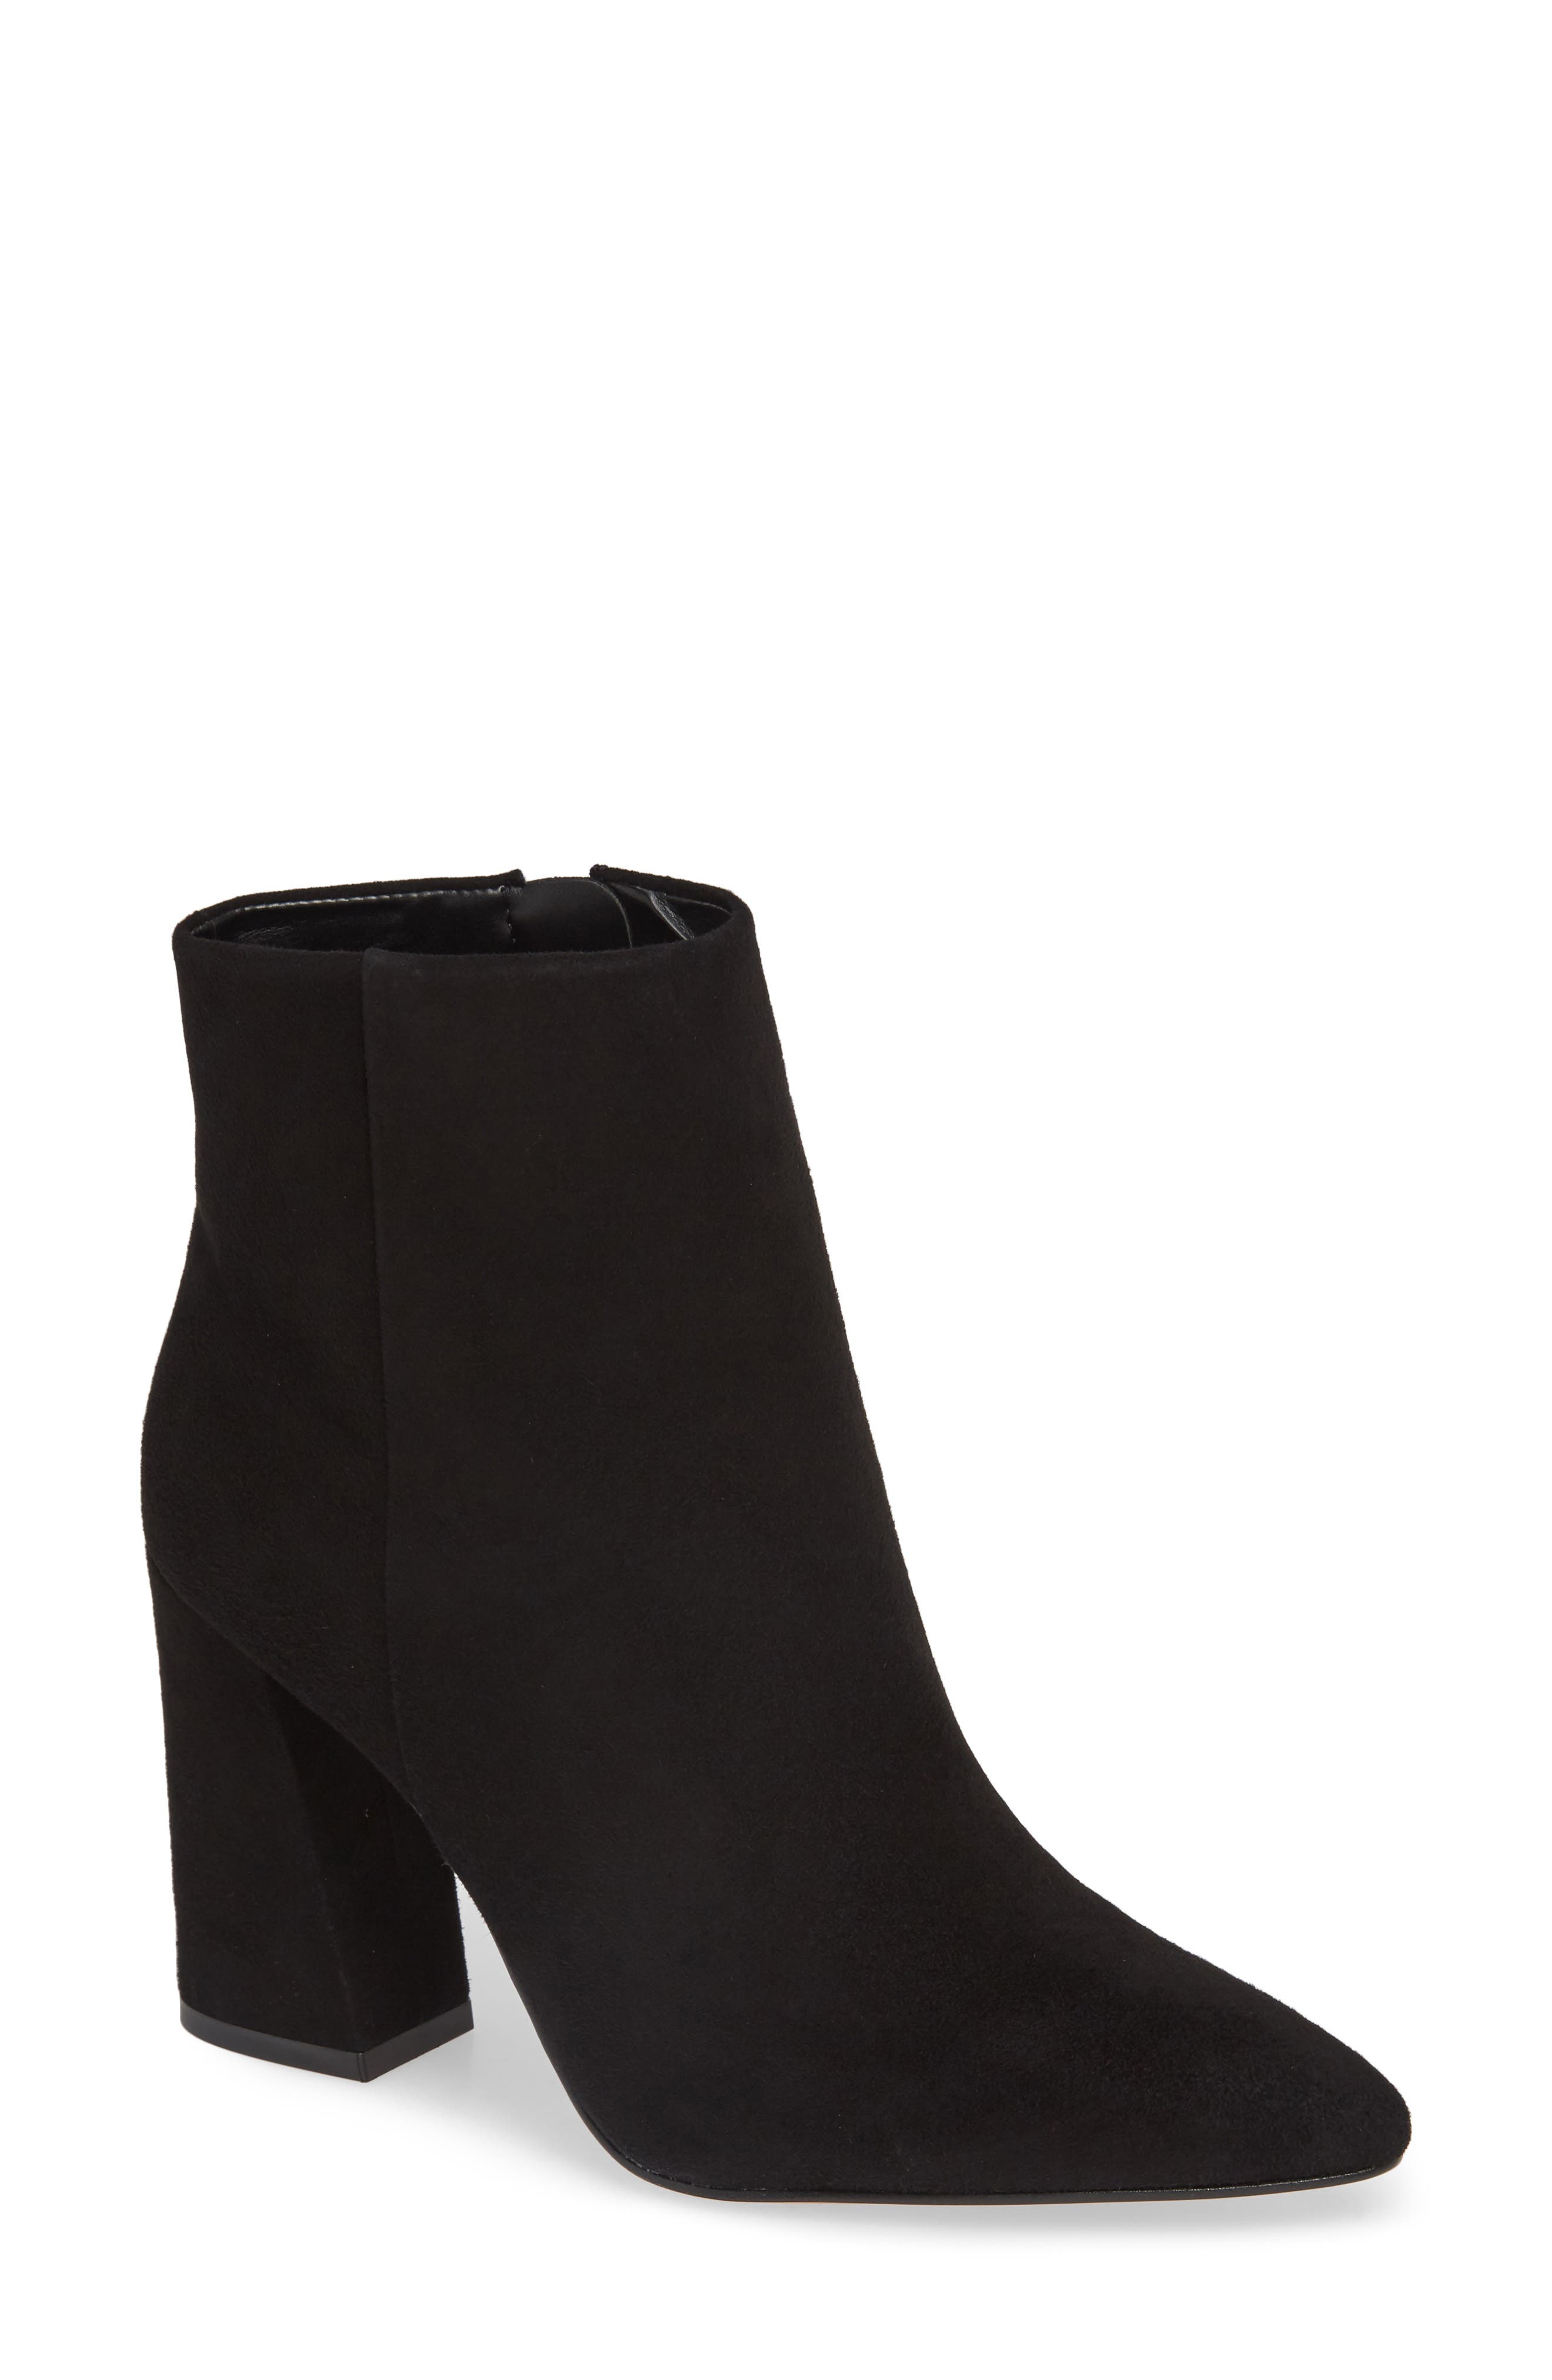 thelmin genuine calf hair bootie vince camuto